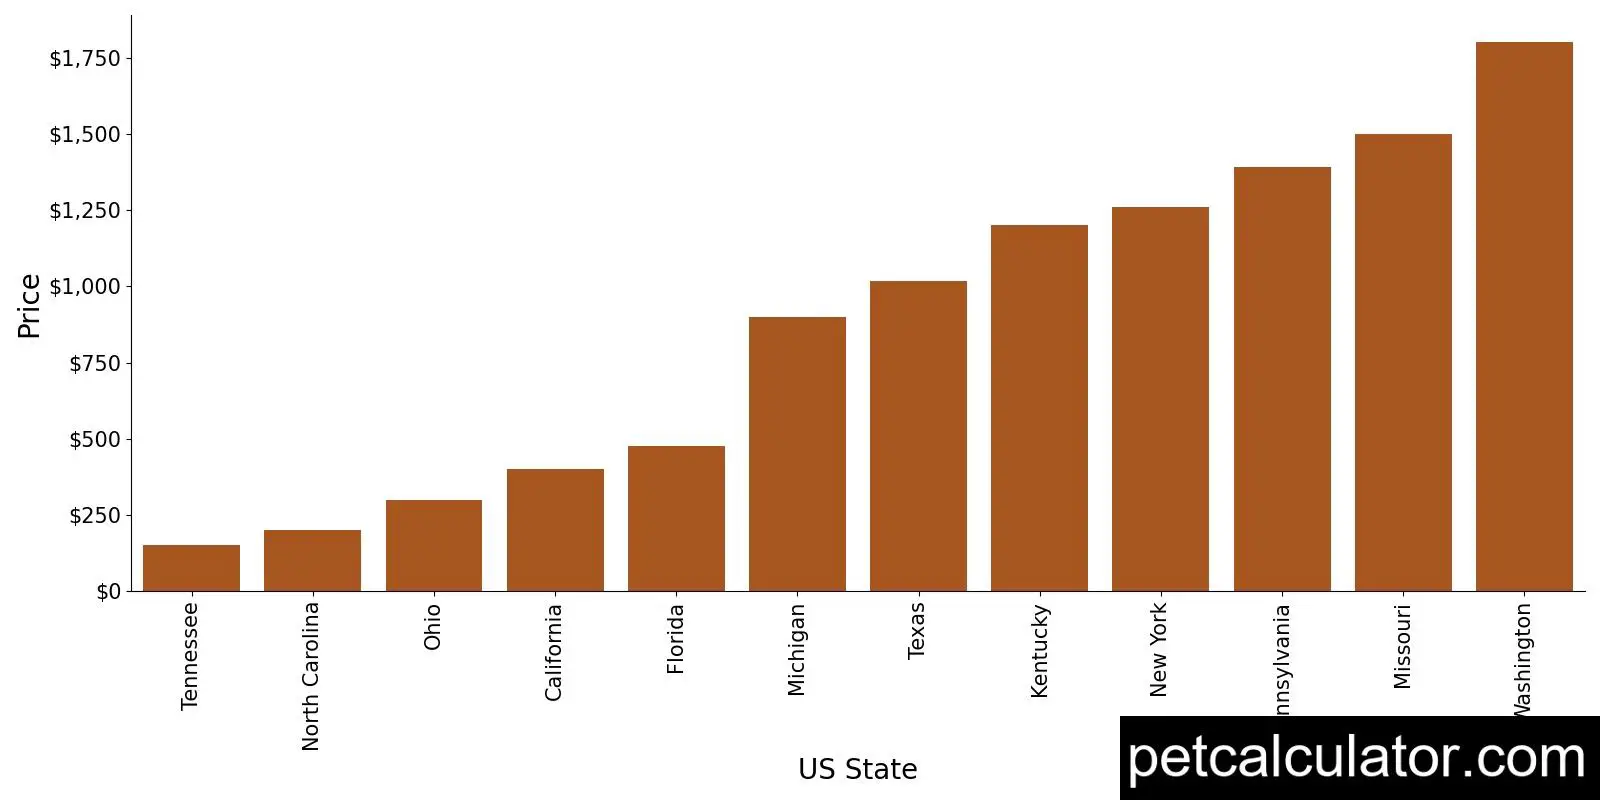 Price of Australian Terrier by US State 